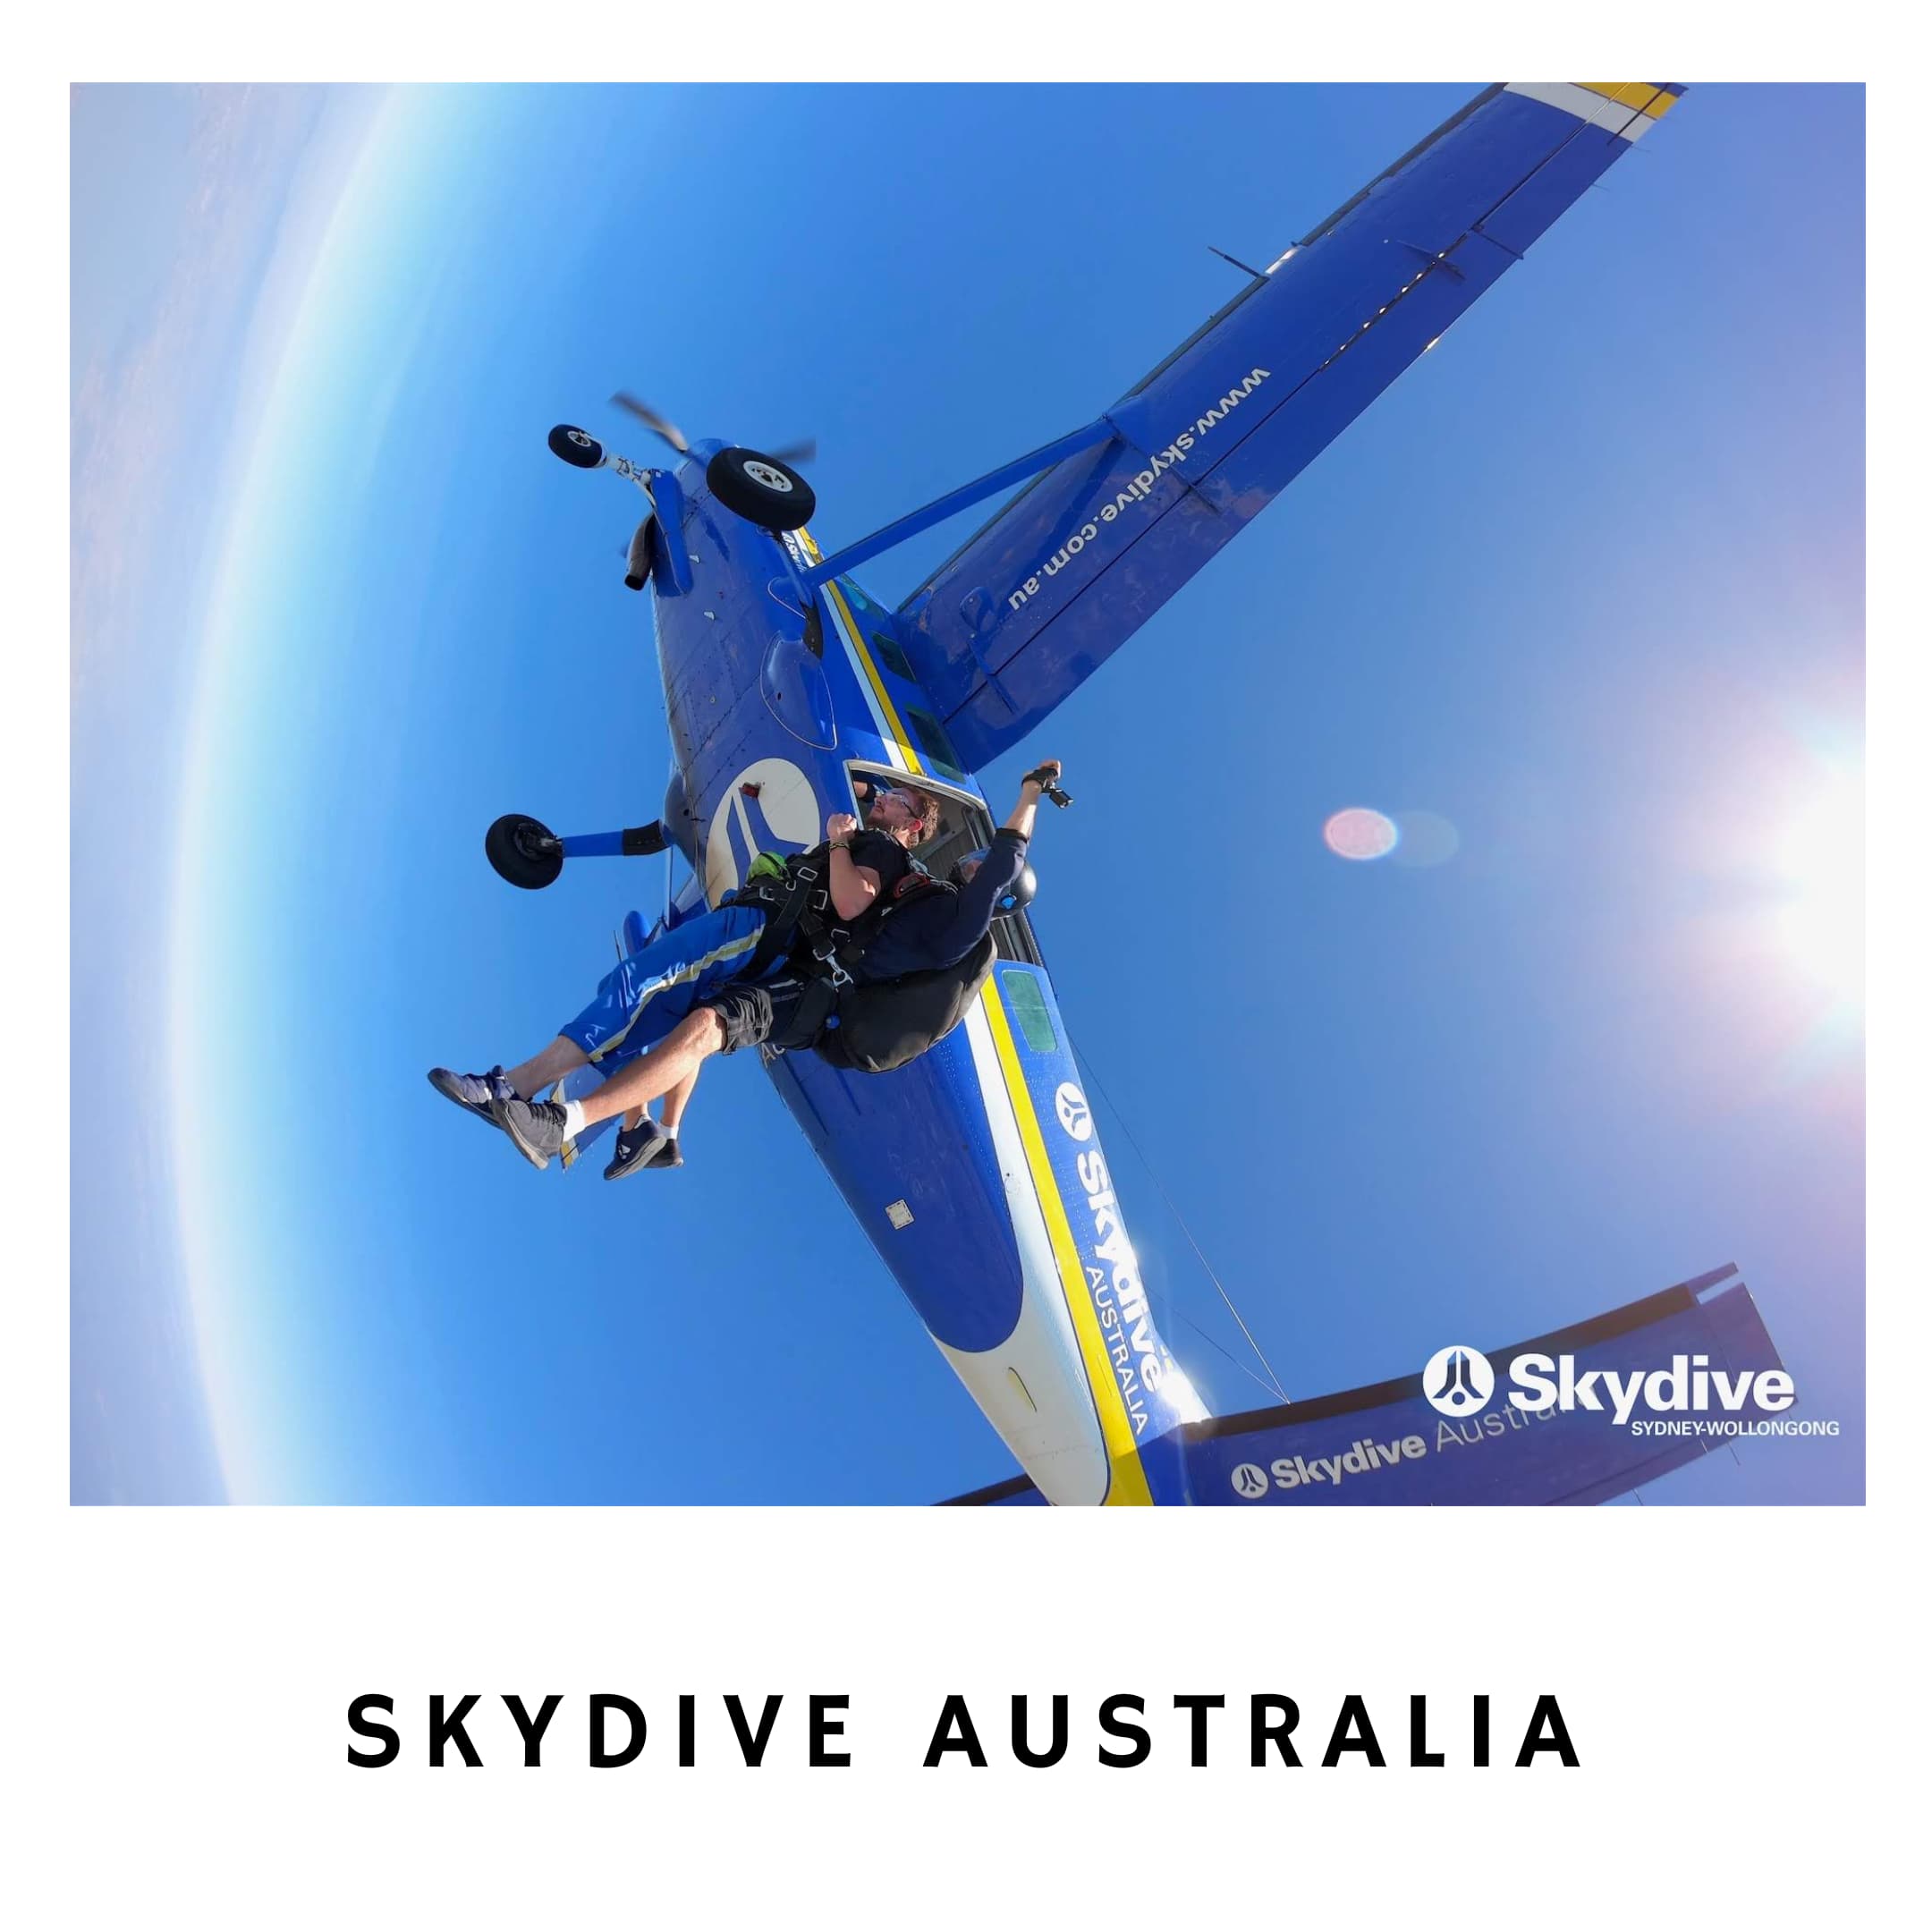 Link to the Skydive Australia travel guide